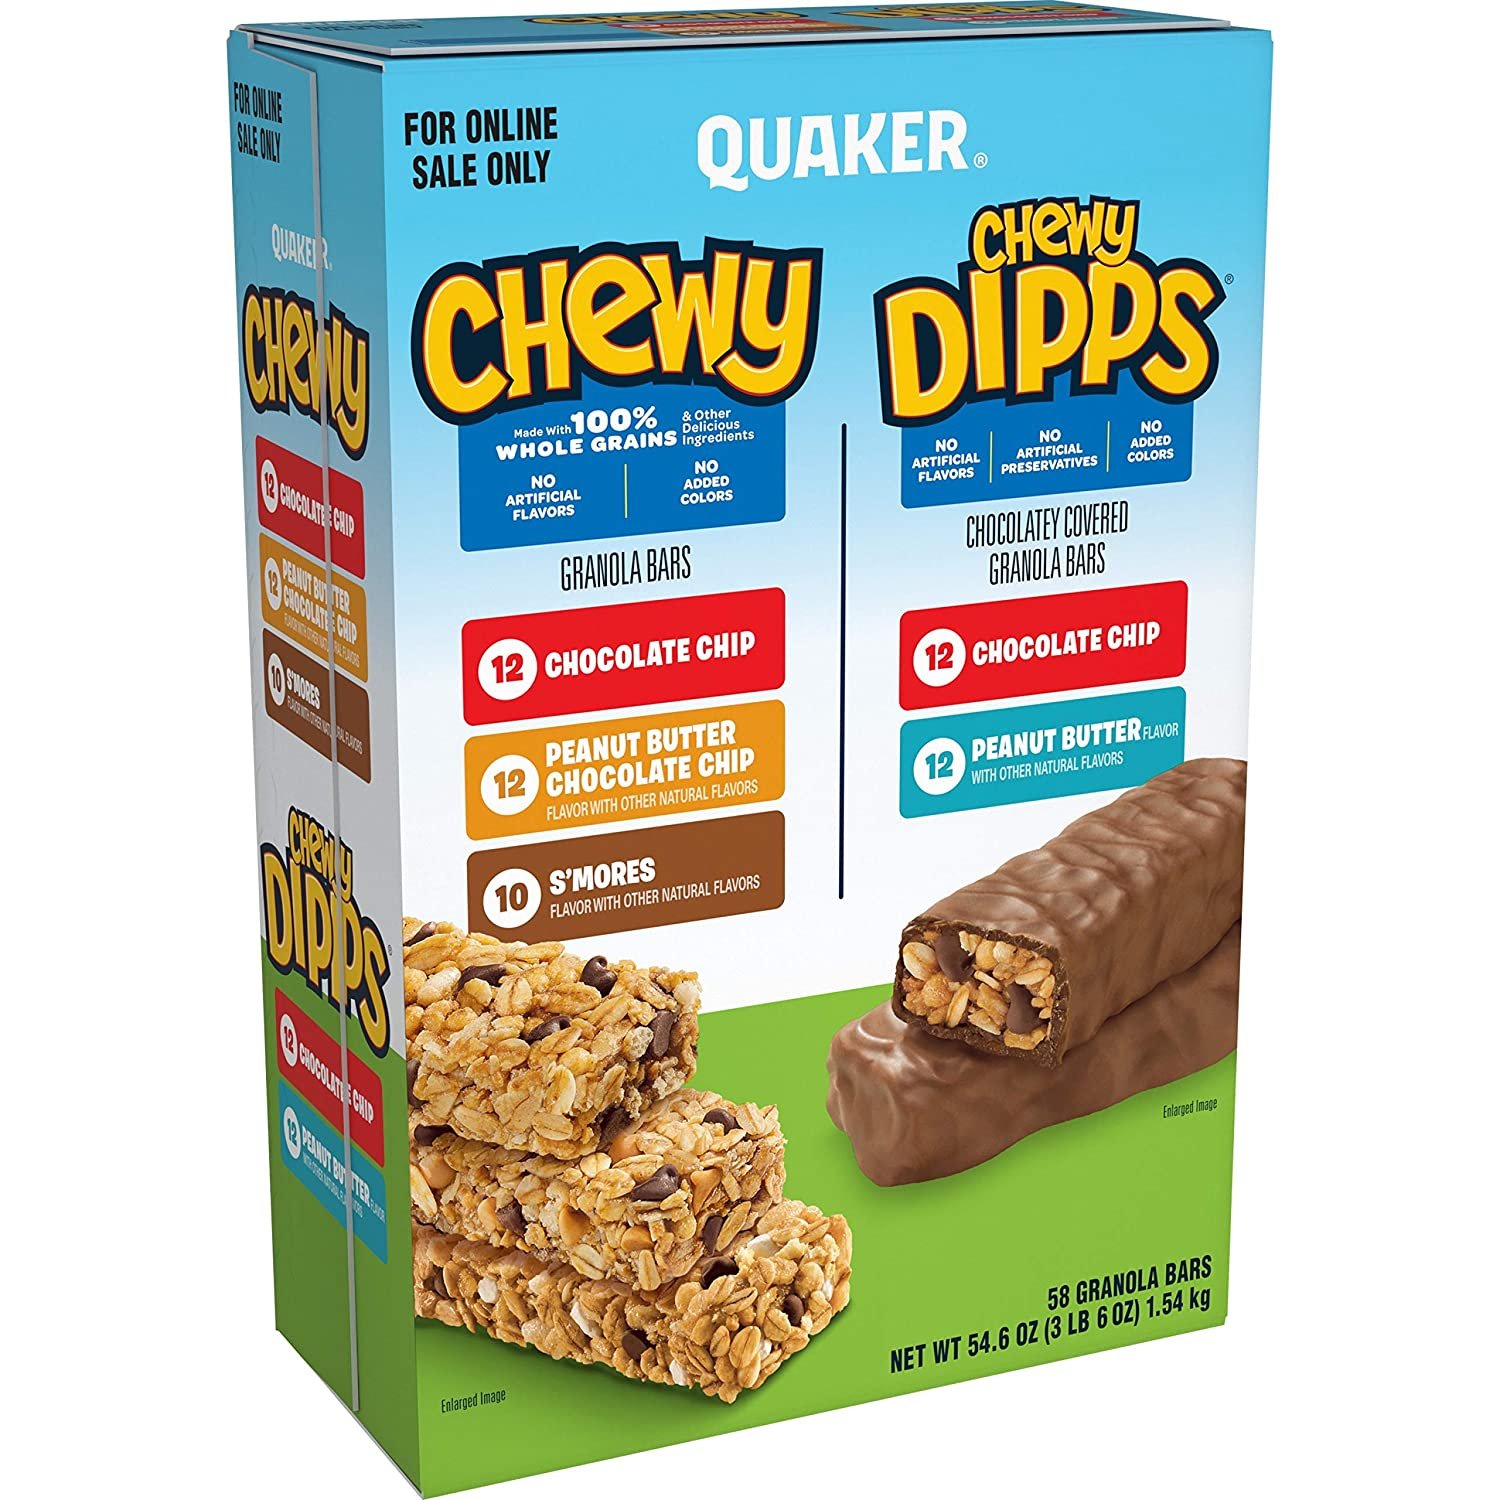 Quaker Chewy Anddipps Variety Pack 58 Packs For School And On The Go